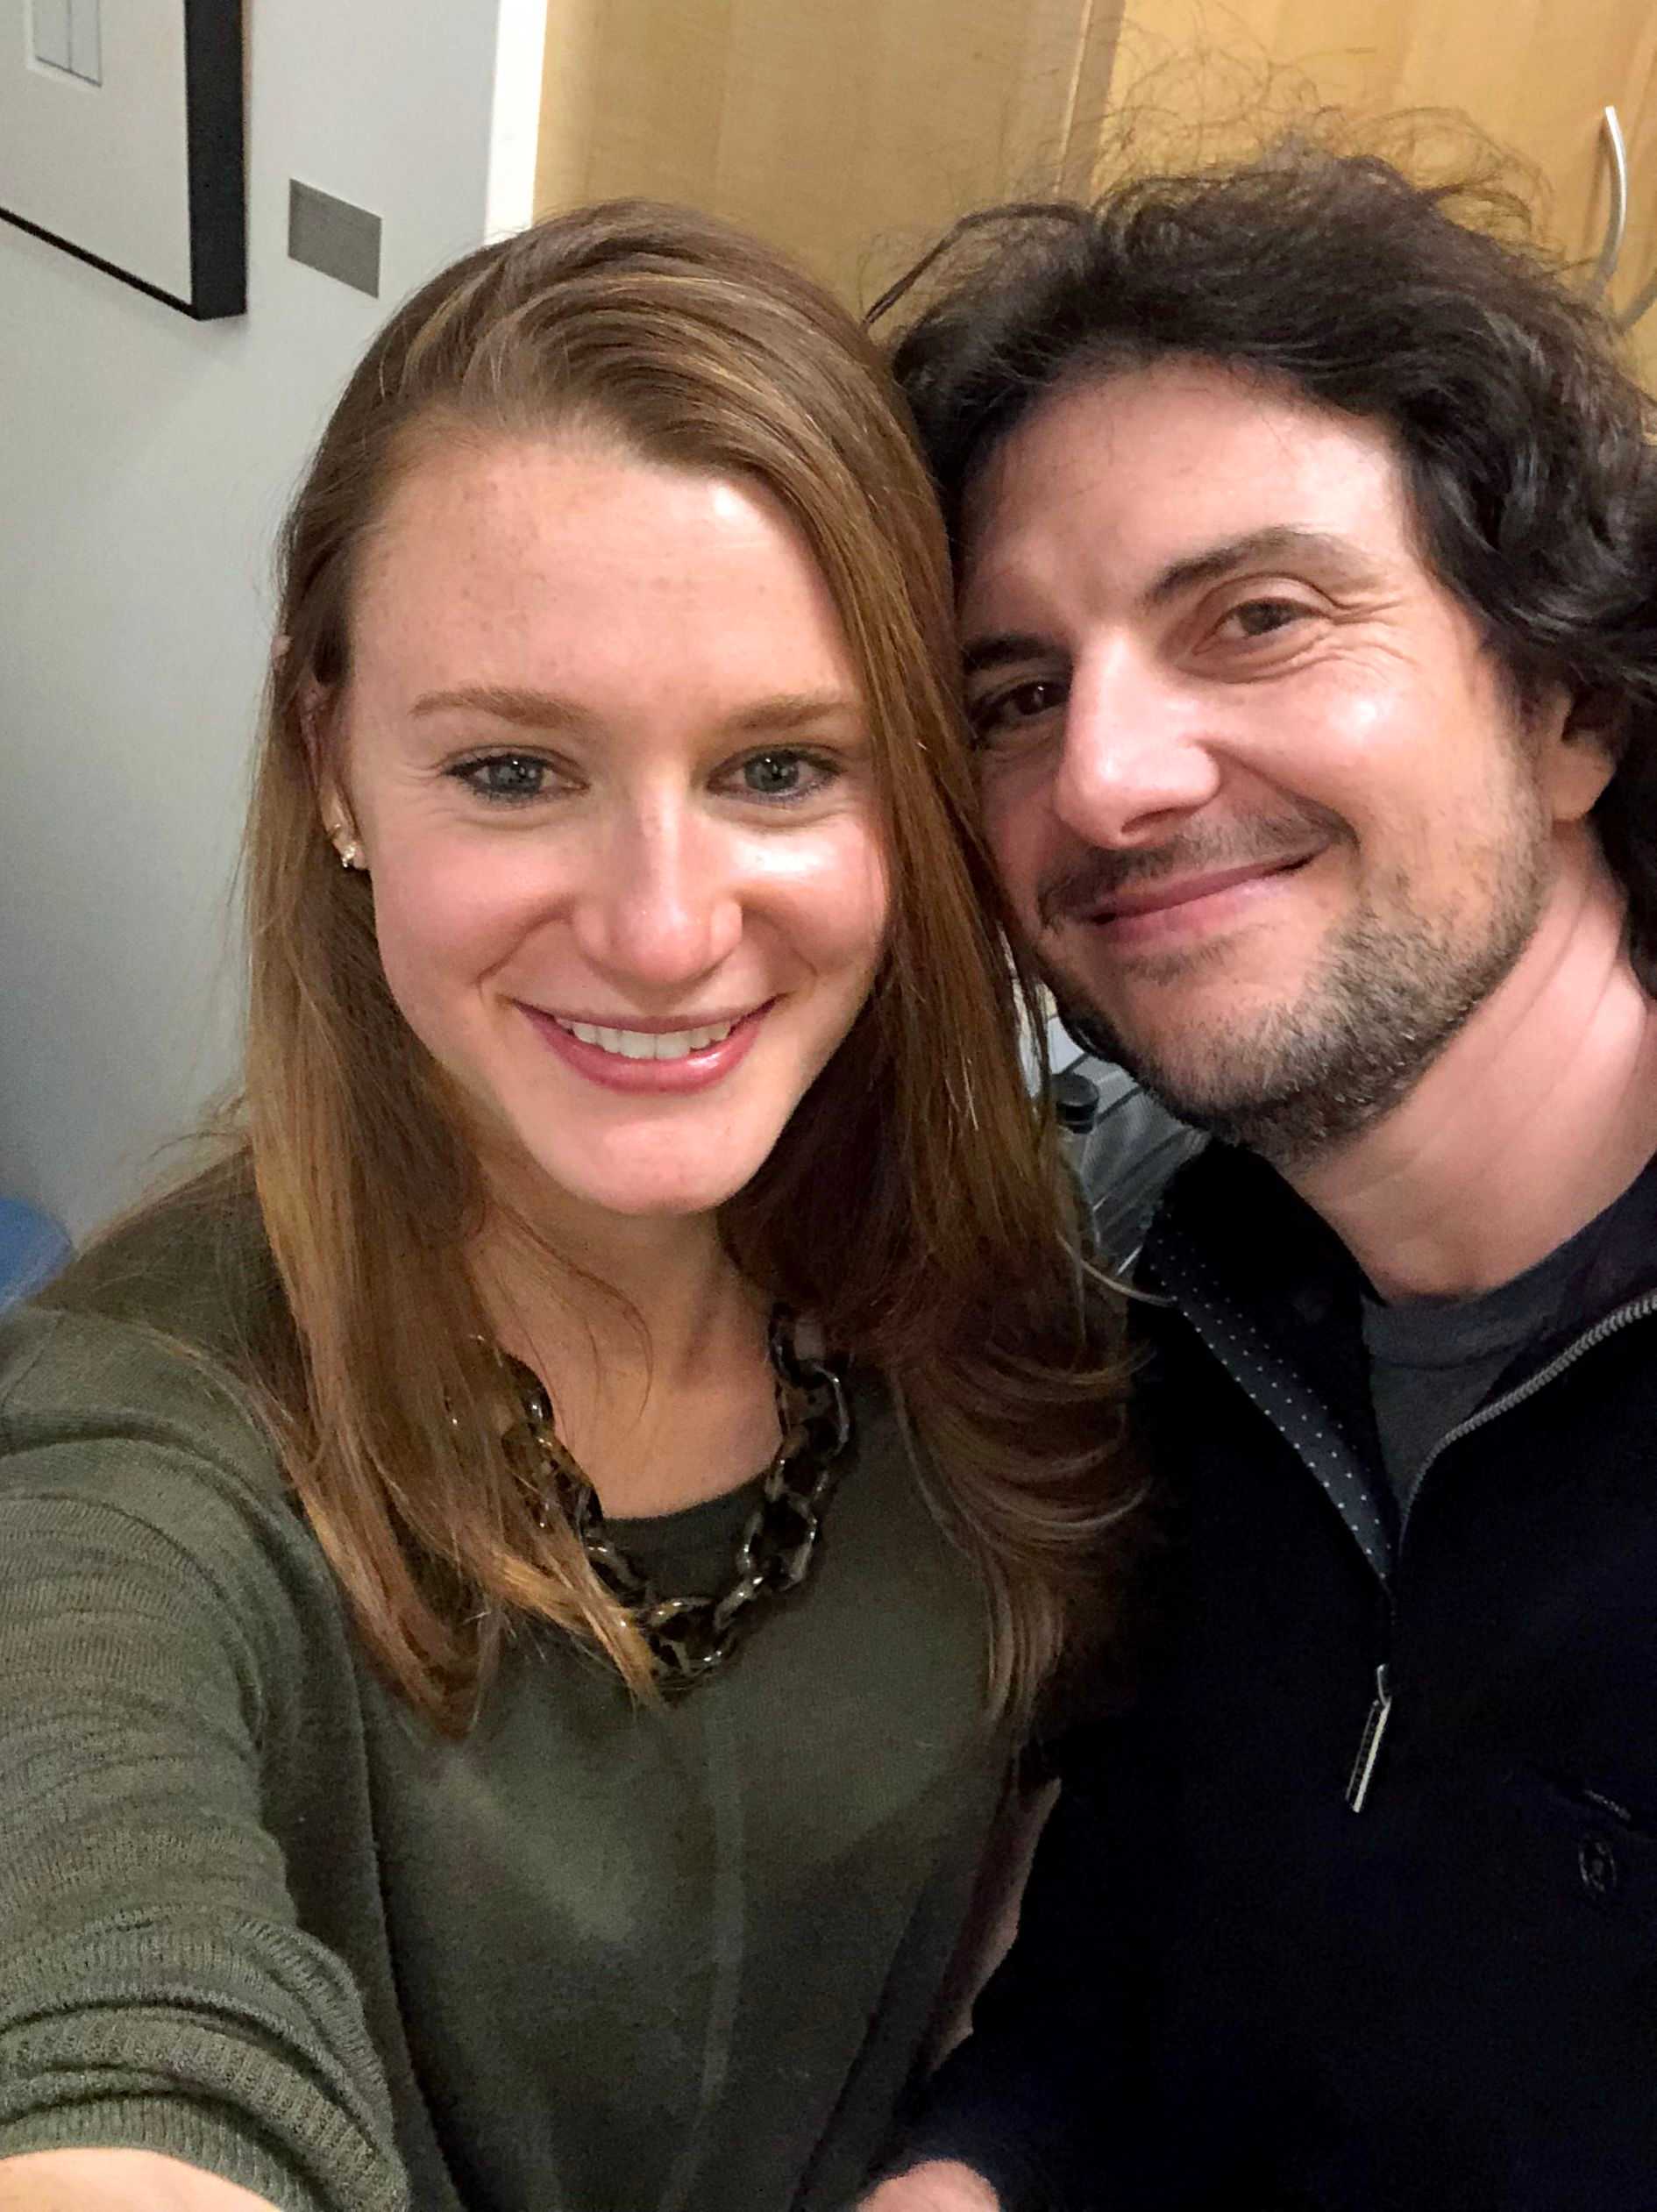 Kristin Knouse and David Sabatini shown together in a selfie, taken in February 2018, two months before their friendship would include a sexual dimension.